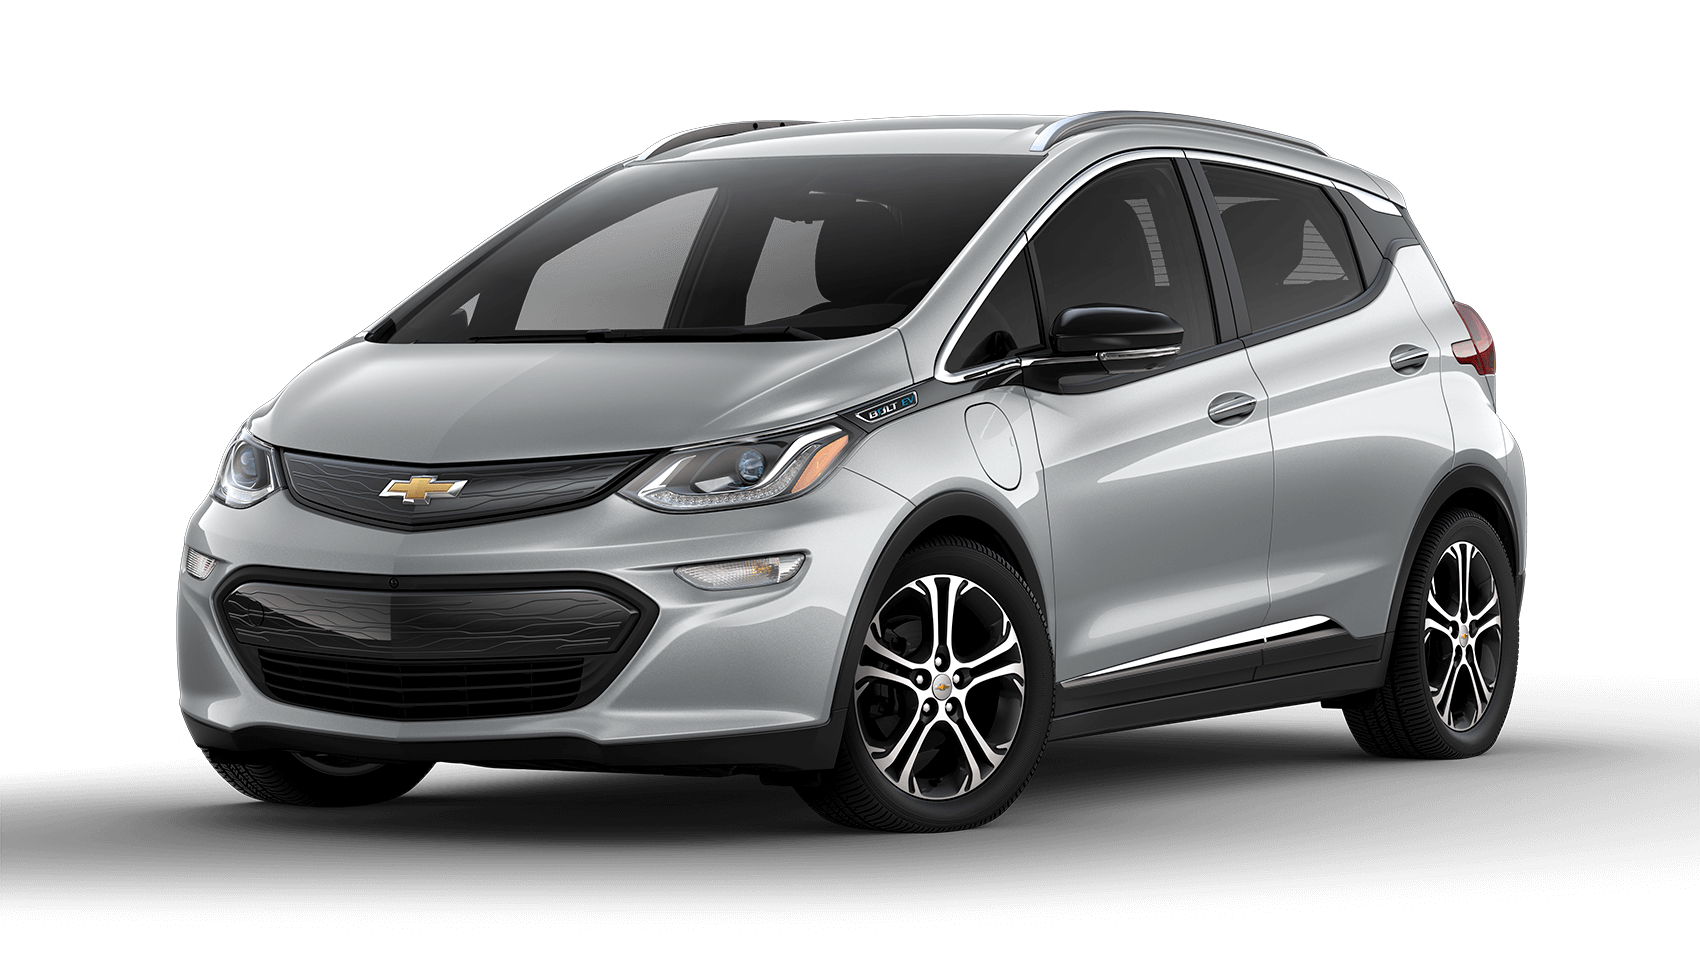 2021 Chevy Bolt EV Review Ithaca NY Maguire Chevy Ithaca